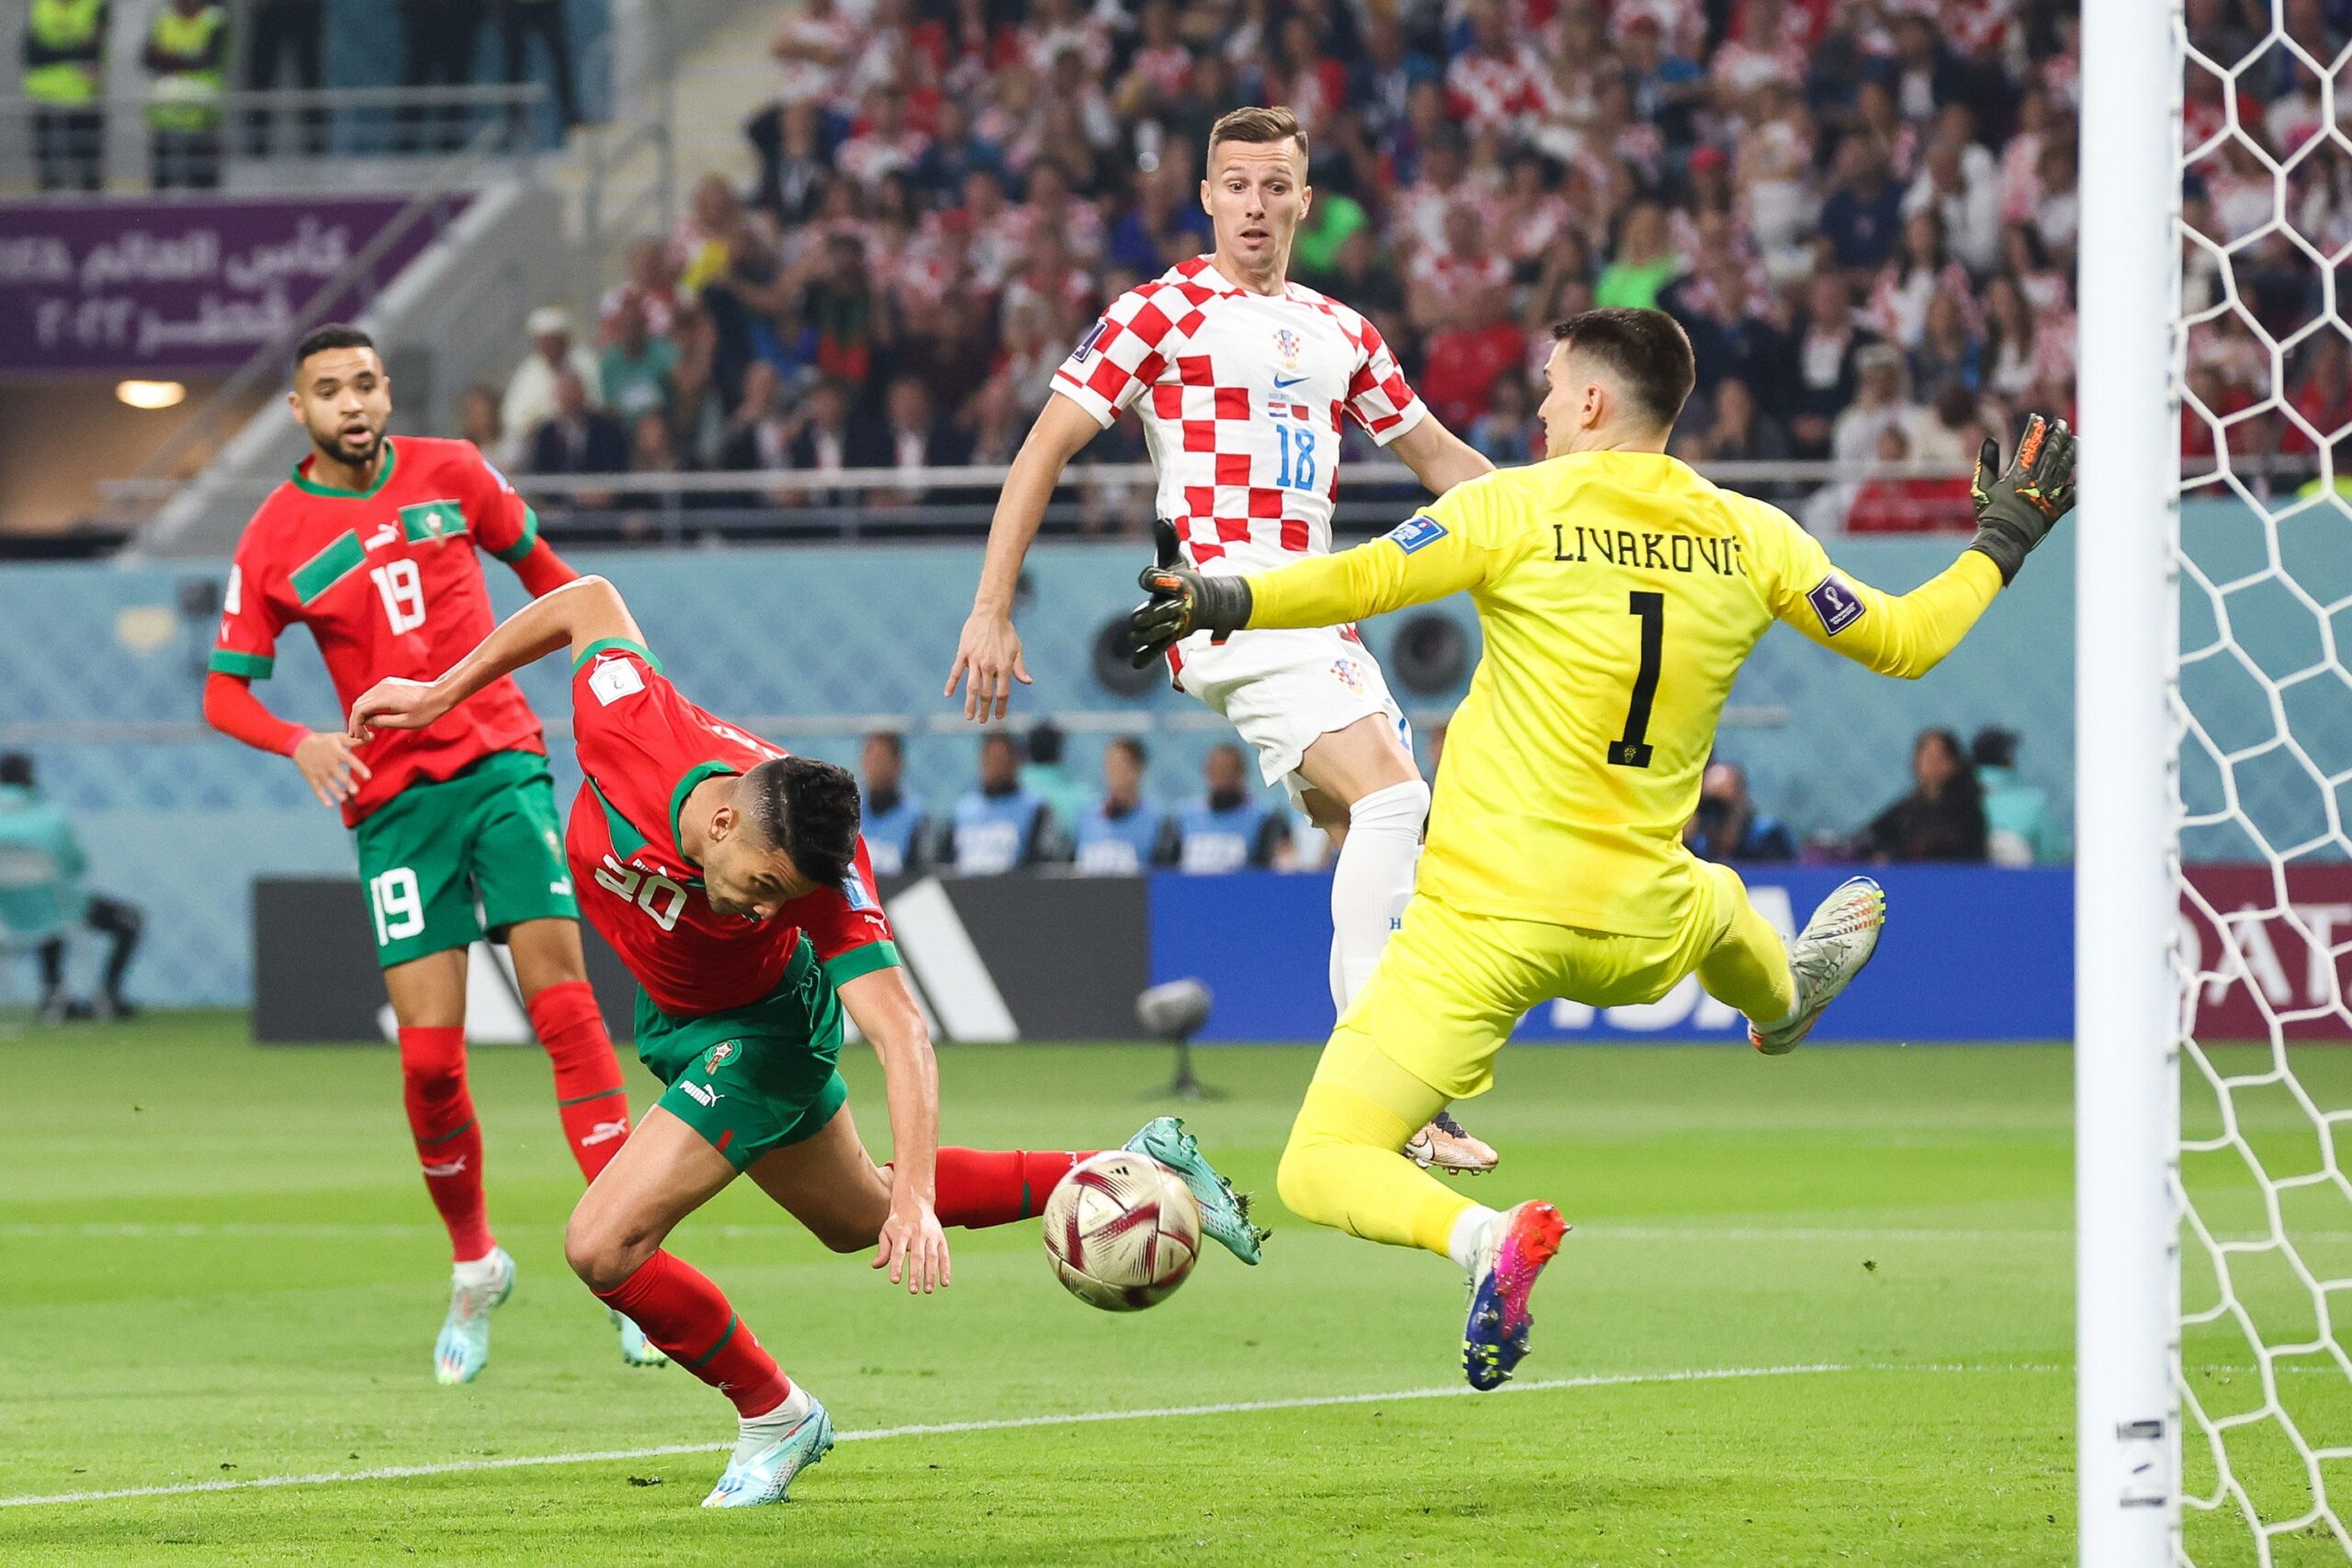 Morocco found themselves on the wrong side of a 2-1 scoreline in today's 2022 World Cup third-place playoff encounter against Croatia